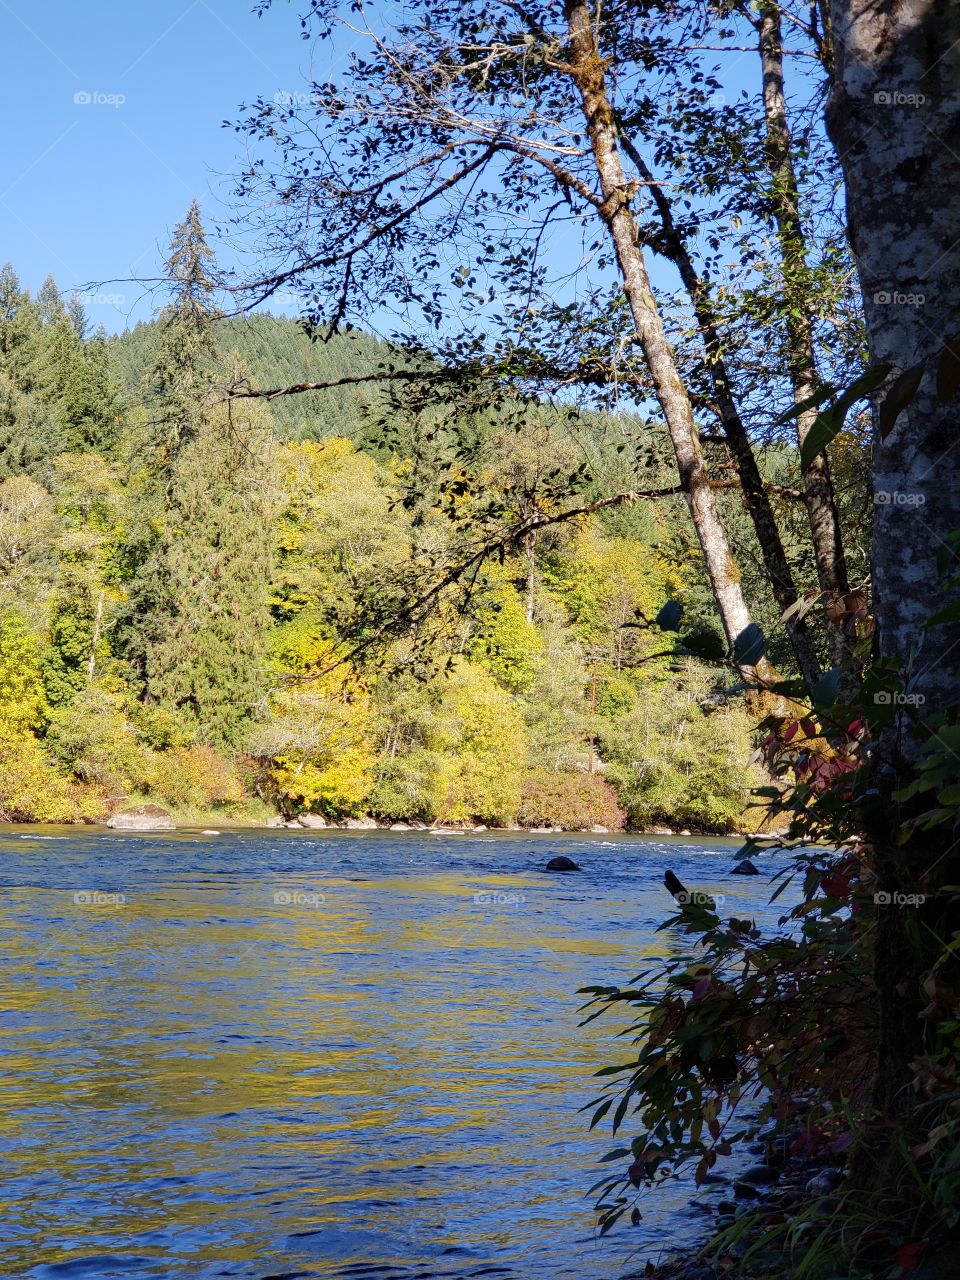 View across the beautiful McKenzie River in the forests of Oregon to trees and foliage in brilliant yellow and golden fall colors on the banks on the other side on a sunny fall day with clear skies. 